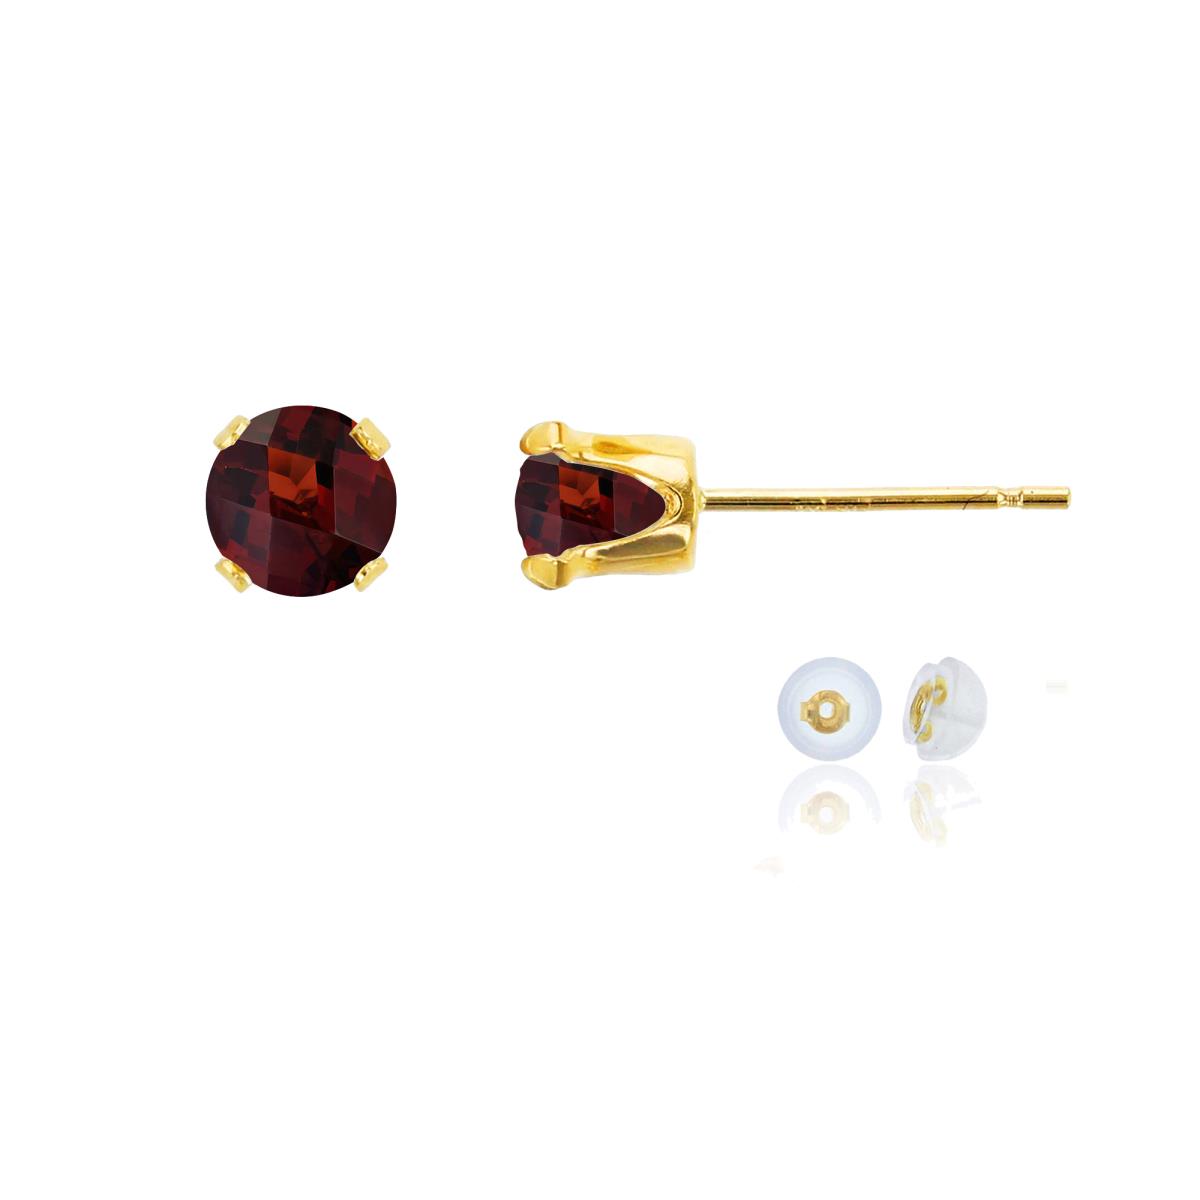 10K Yellow Gold 5mm Round Garnet Stud Earring with Silicone Back